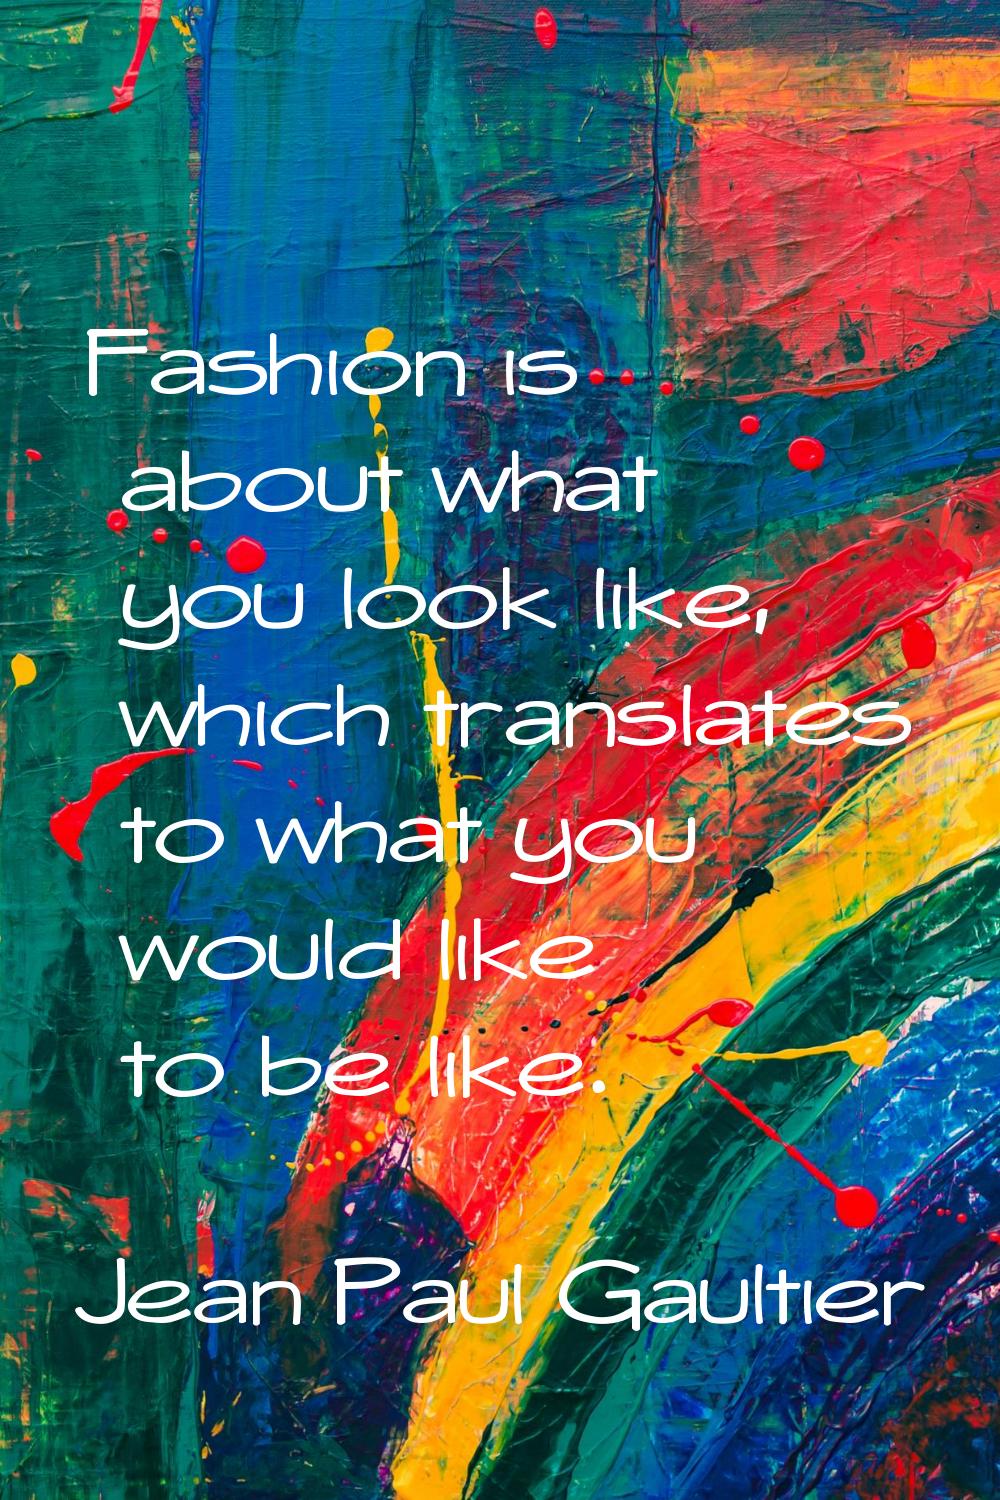 Fashion is about what you look like, which translates to what you would like to be like.